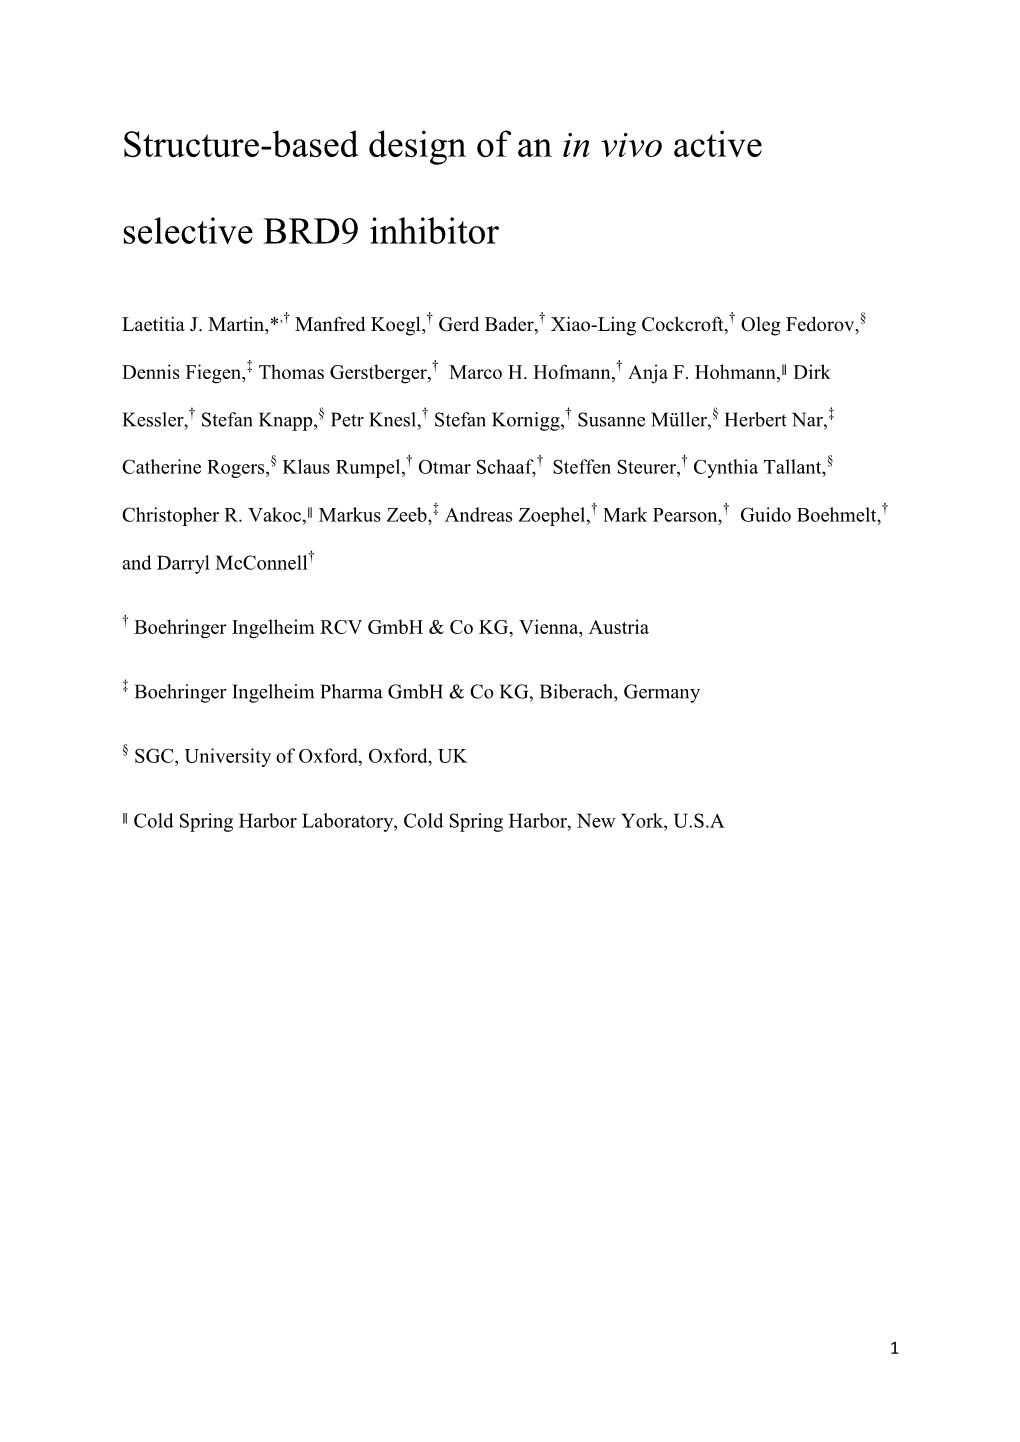 Structure-Based Design of an in Vivo Active Selective BRD9 Inhibitor